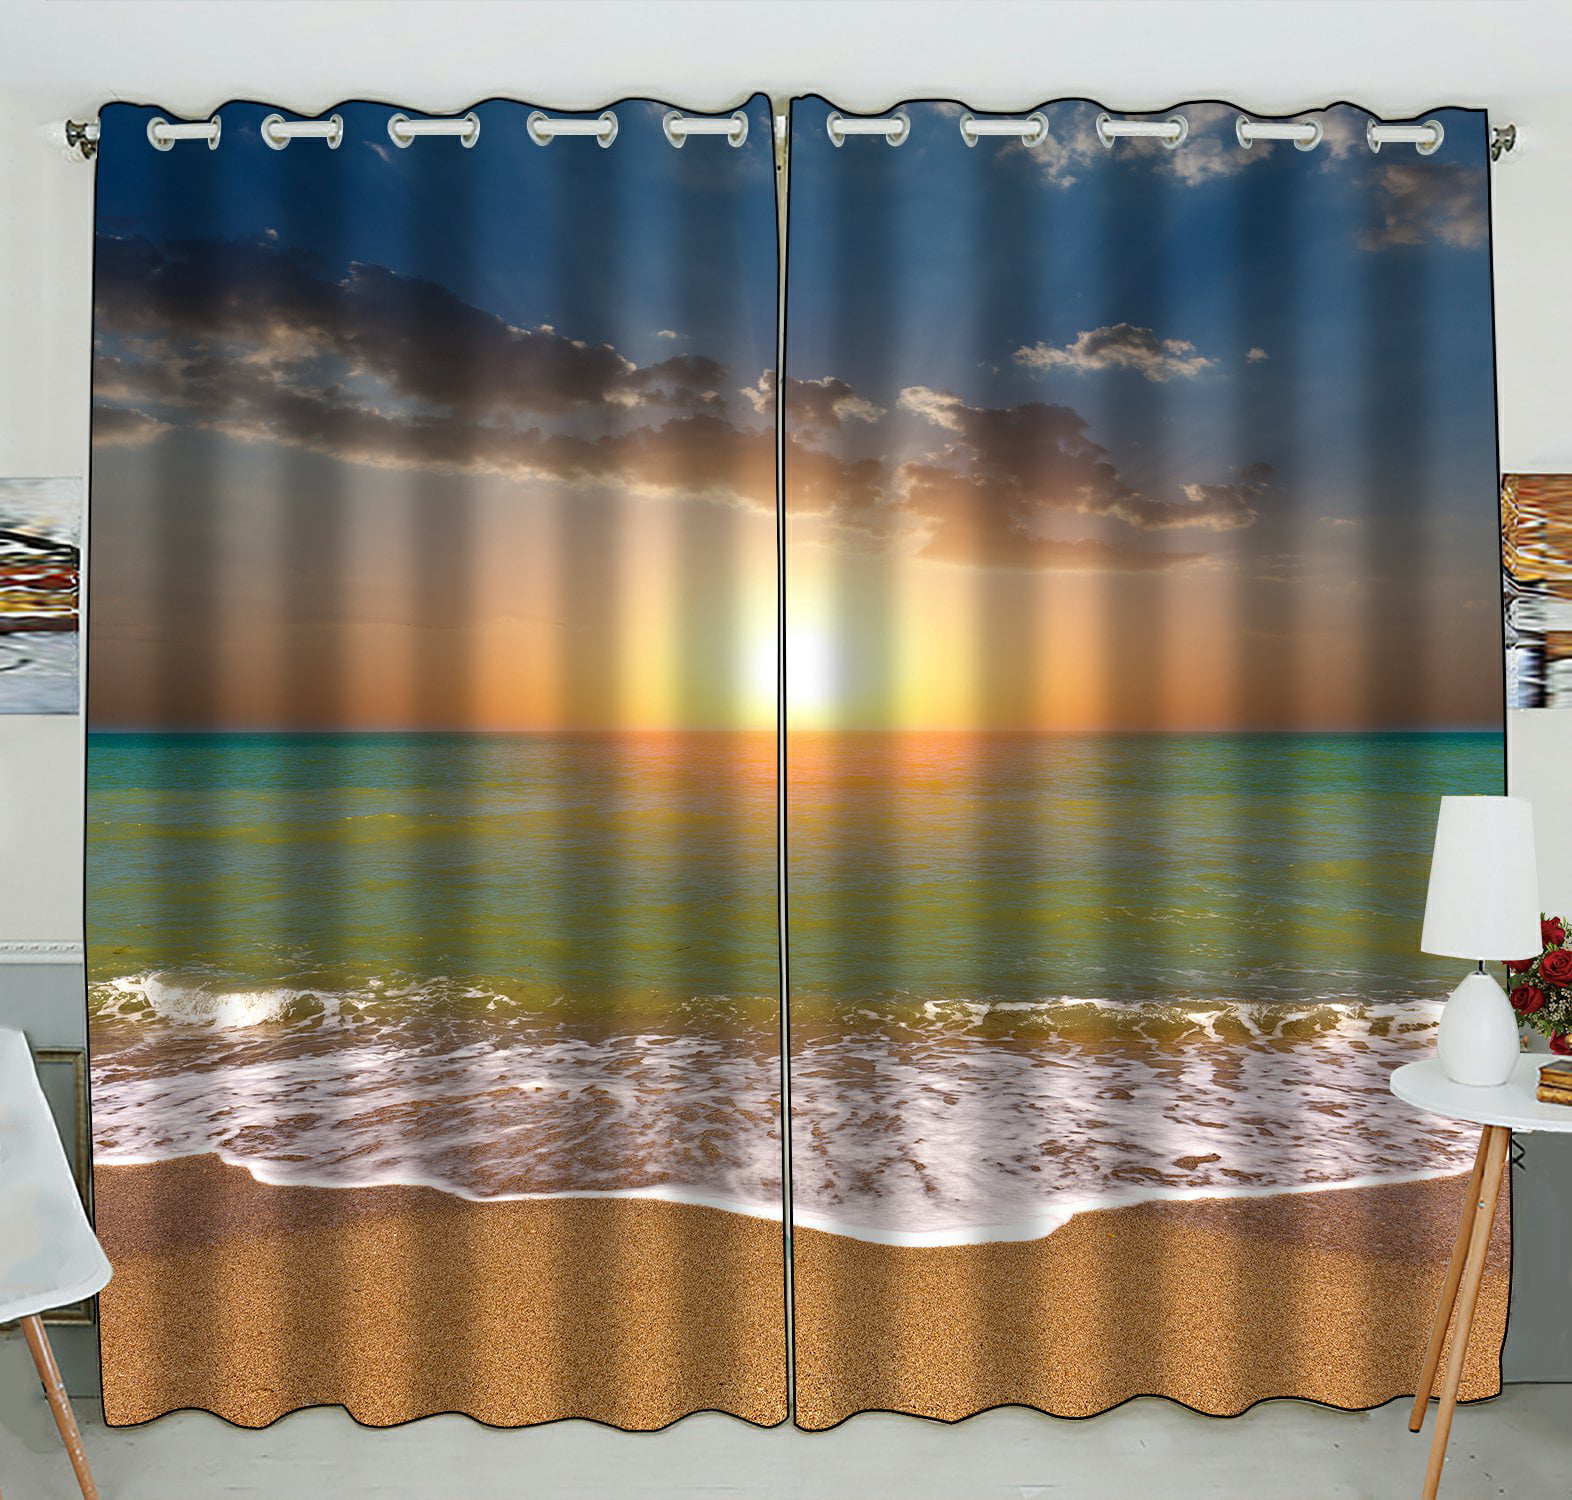 Sunset Forest Seaside 3D Window Curtain Living Room Curtains Drapes 50% Blackout 